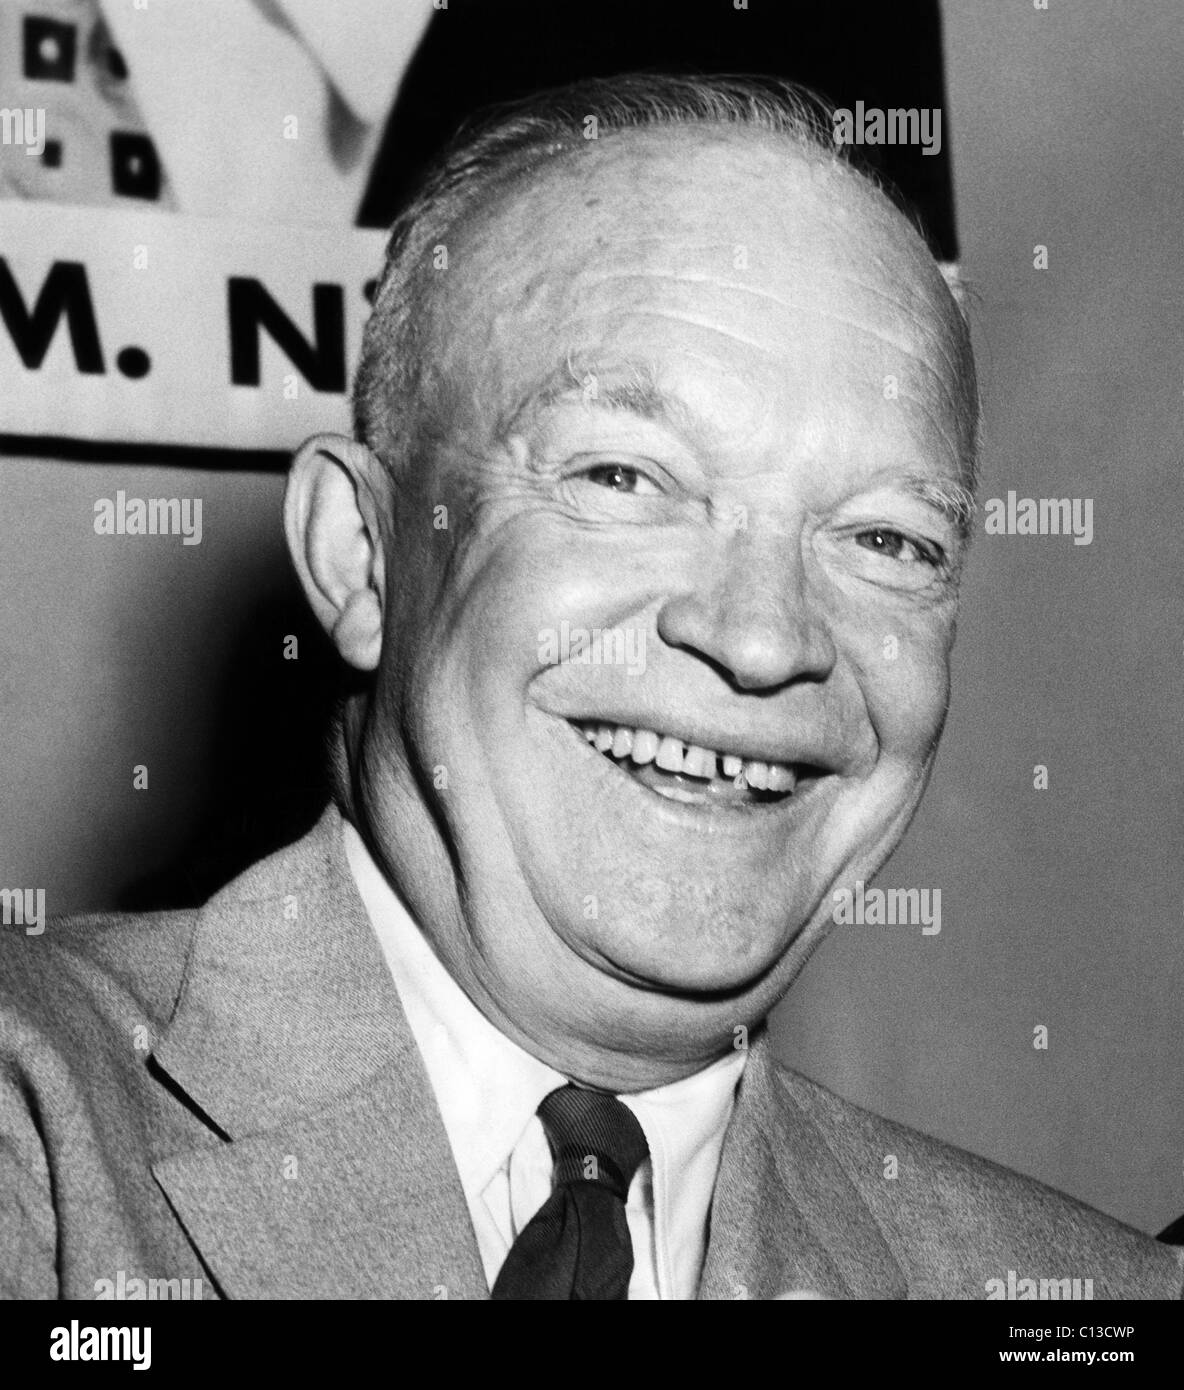 Presidential candidate Dwight D. Eisenhower showing a vacant spot where a cap had fallen off one of his front teeth. 9/8/52. Stock Photo